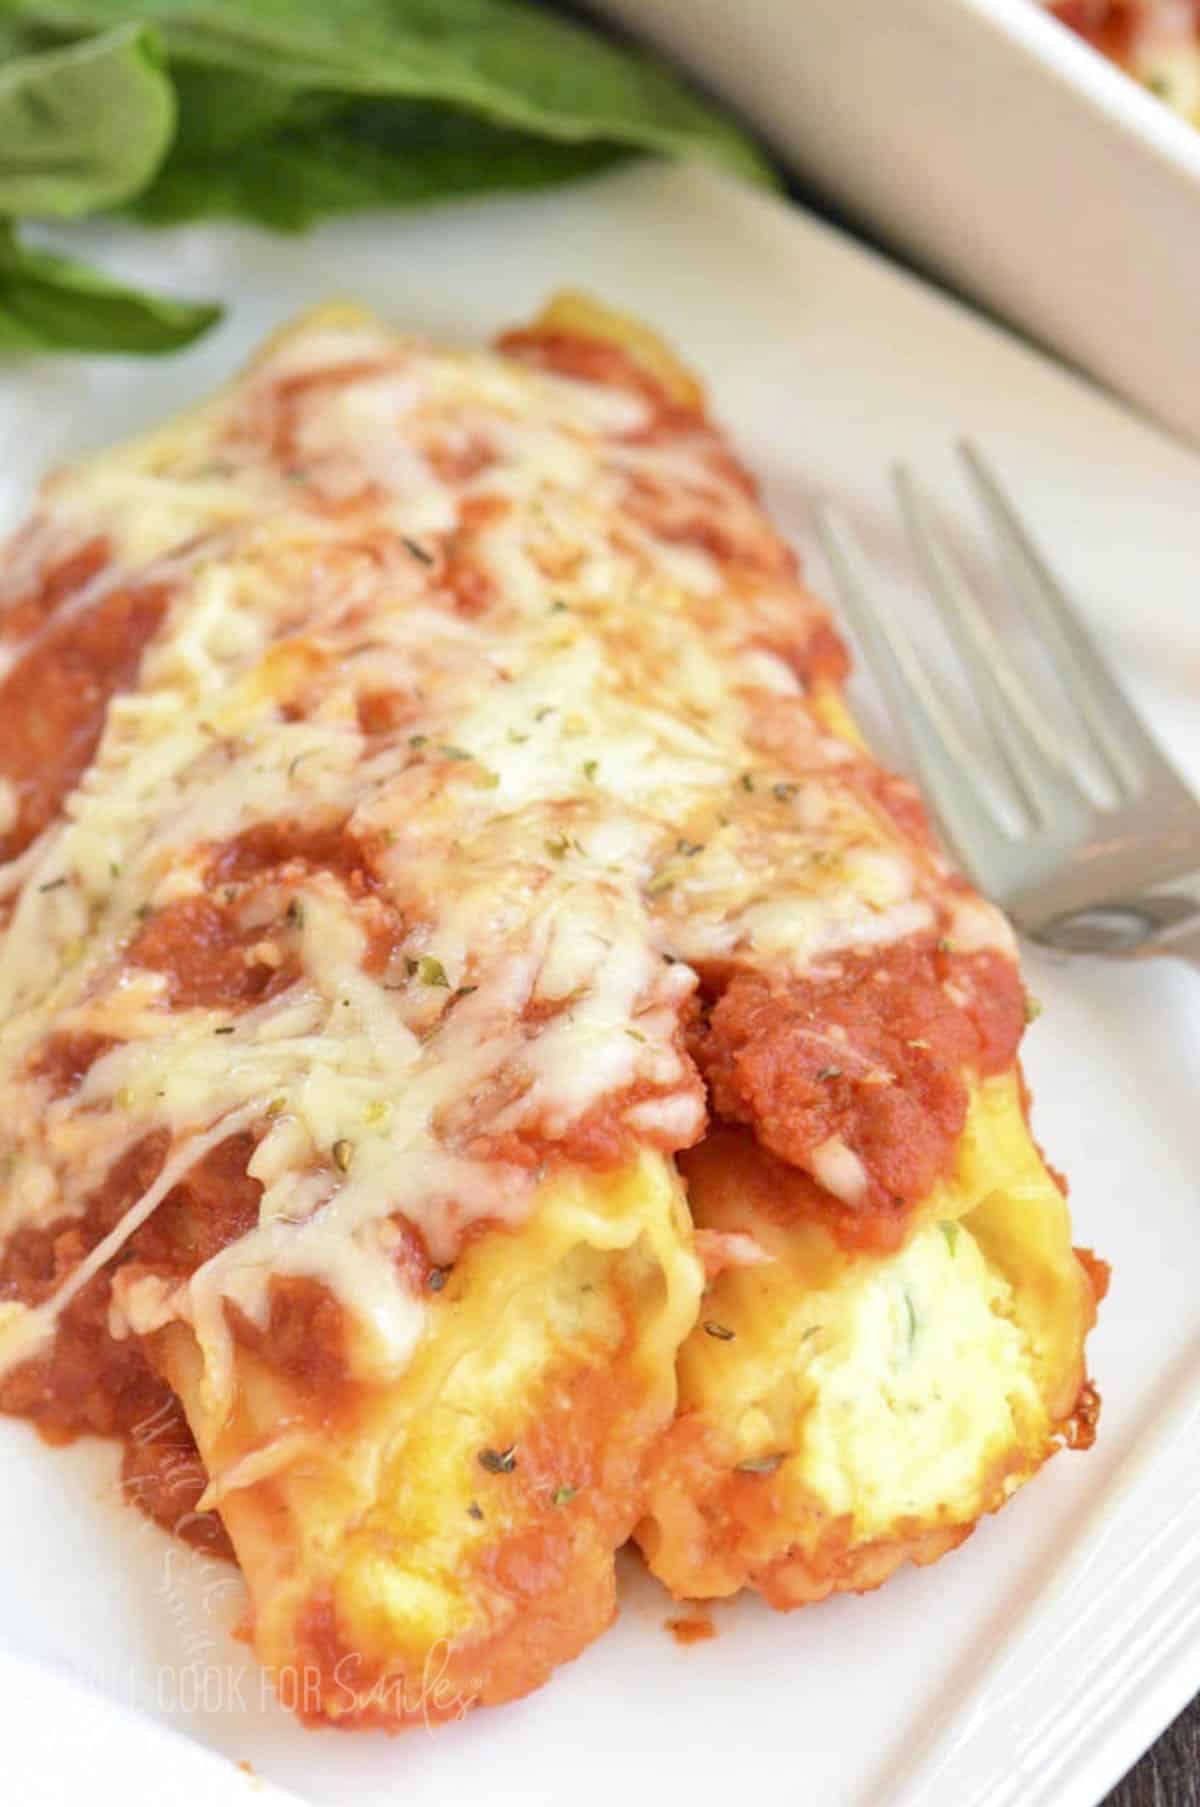 two stuffed manicotti in pasta sauce and cheese on the plate.